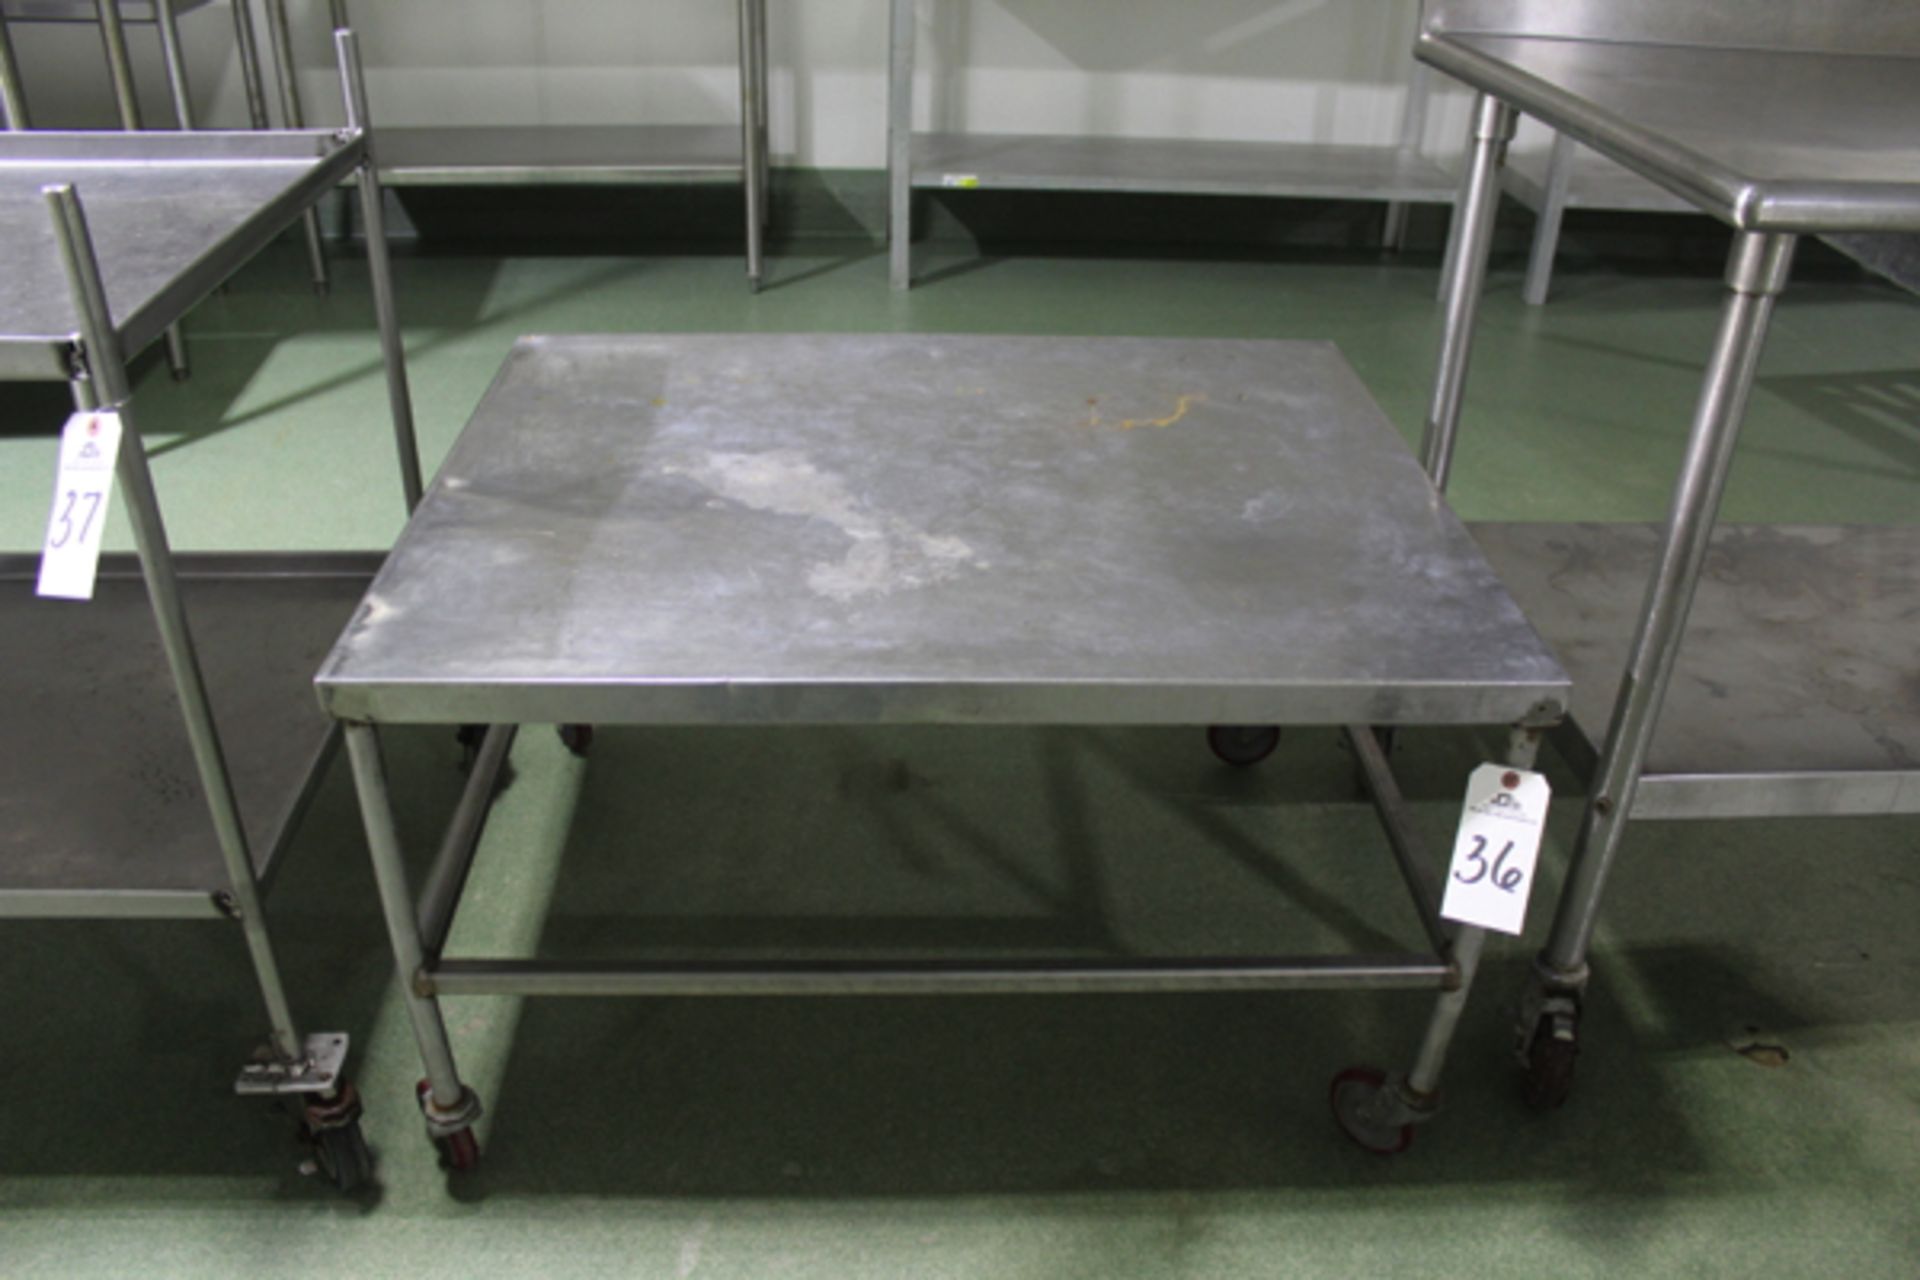 Stainless Steel Prep Table, 31" x 39" | Loading Price: $15 Or Buyer May Hand Carry By February